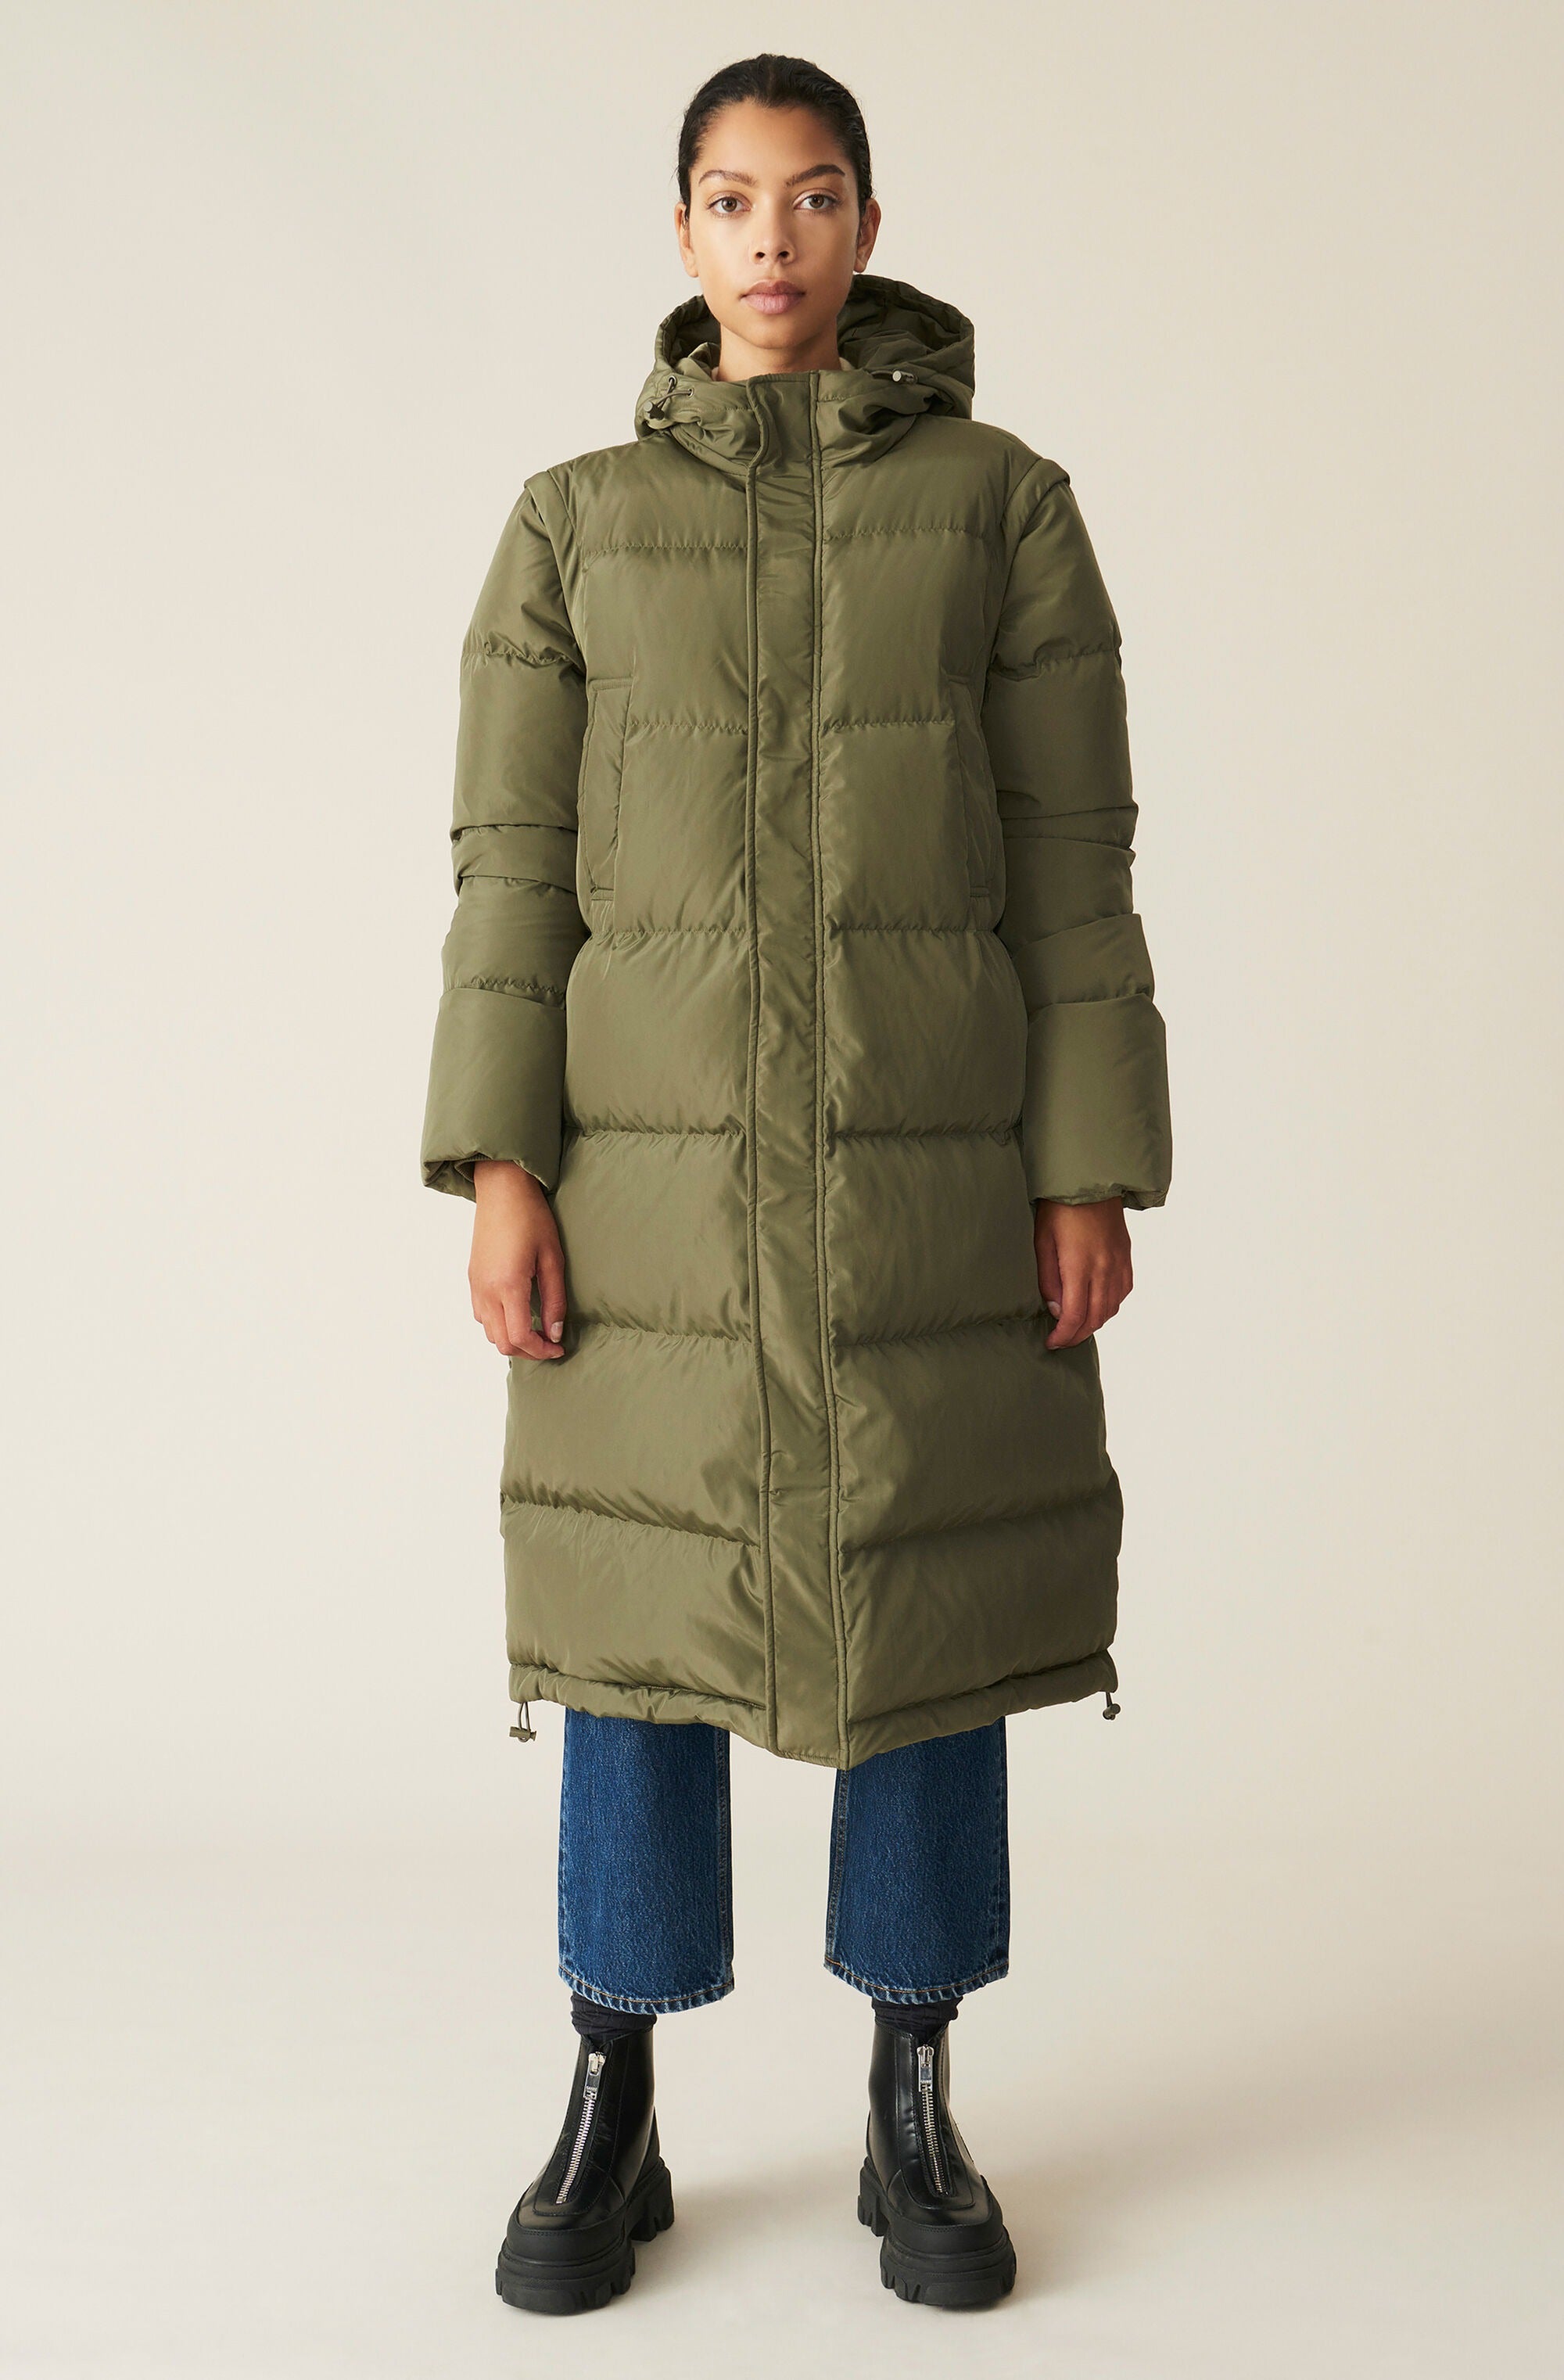 15 Stylish Puffer Jackets That Will Keep You Warm & Cosy – Top Fashion ...